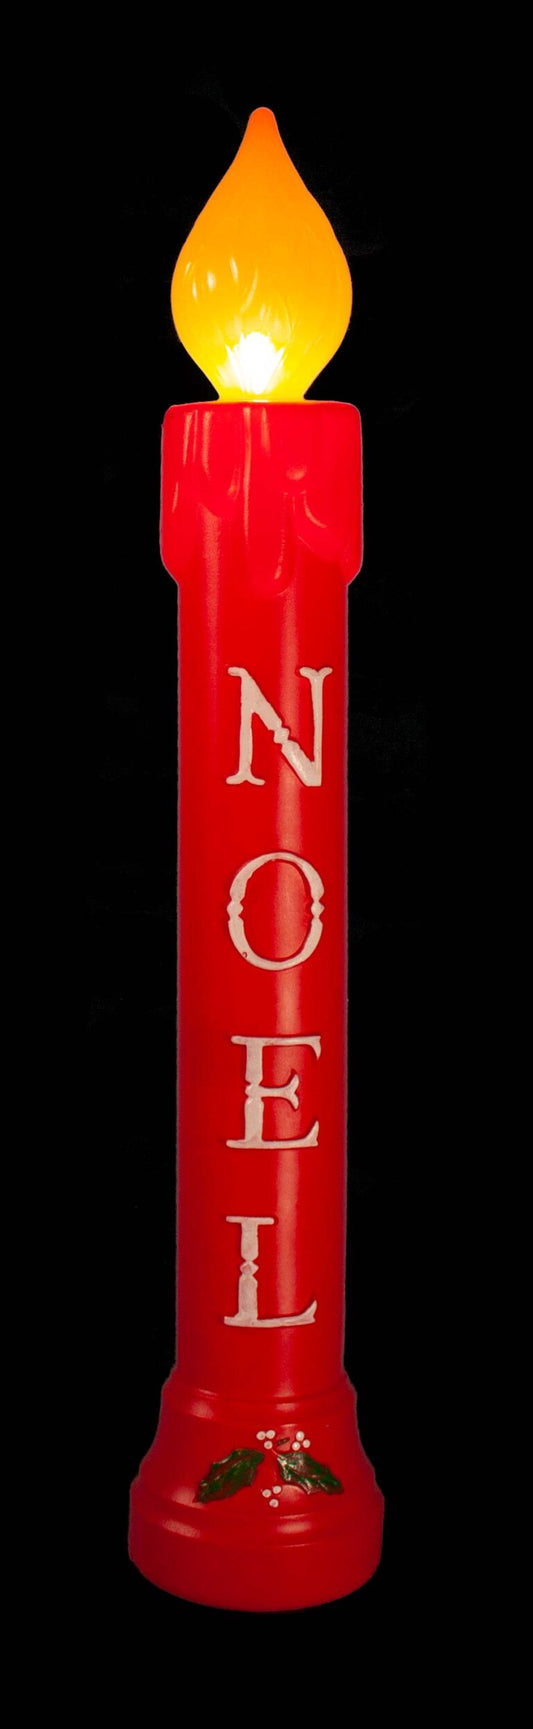 39" Blow-Mold "Noel" Candle